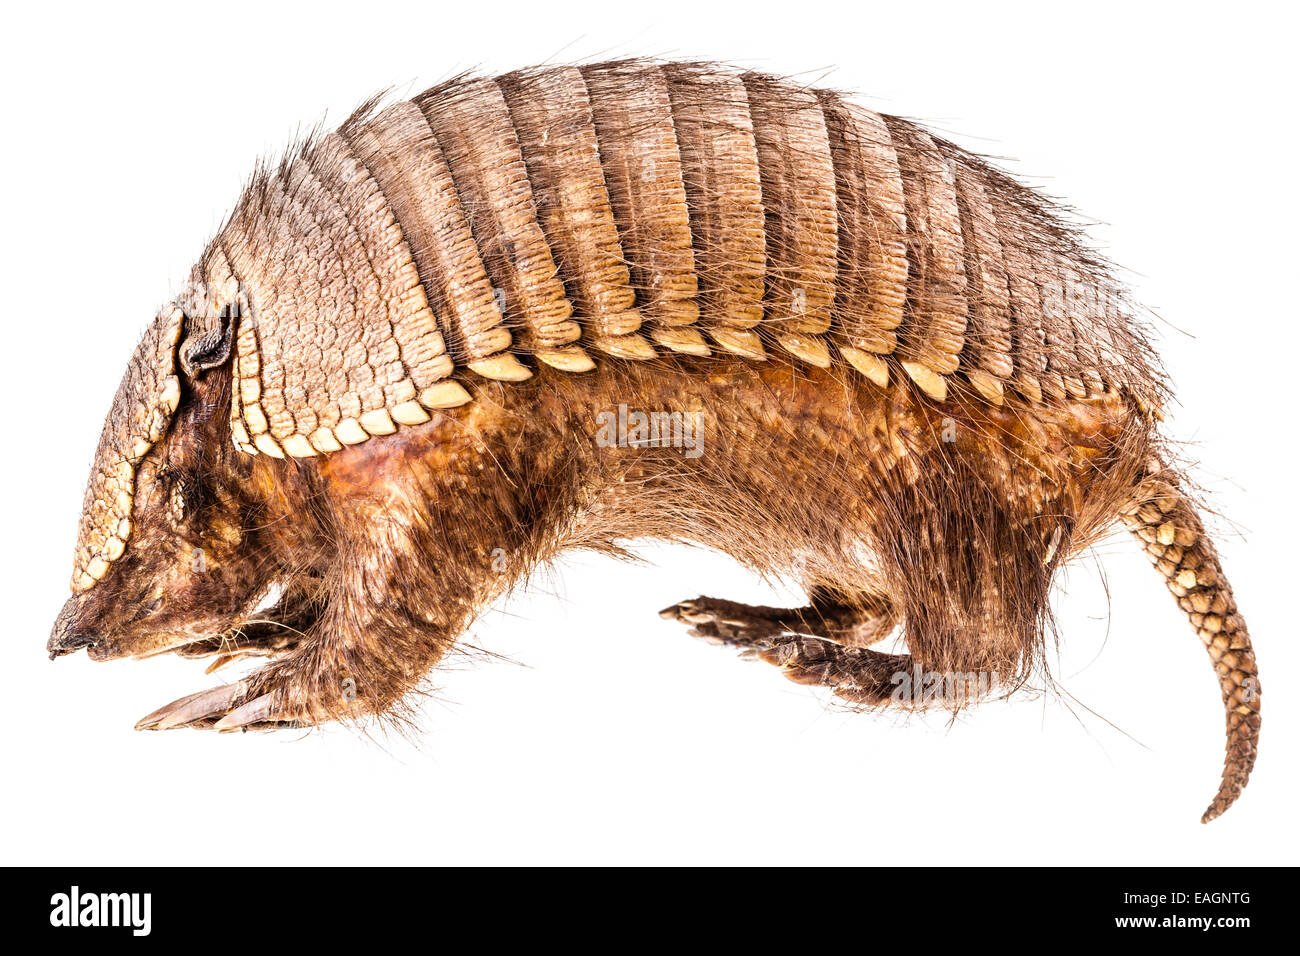 a stuffed armadillo isolated over a white background Stock Photo